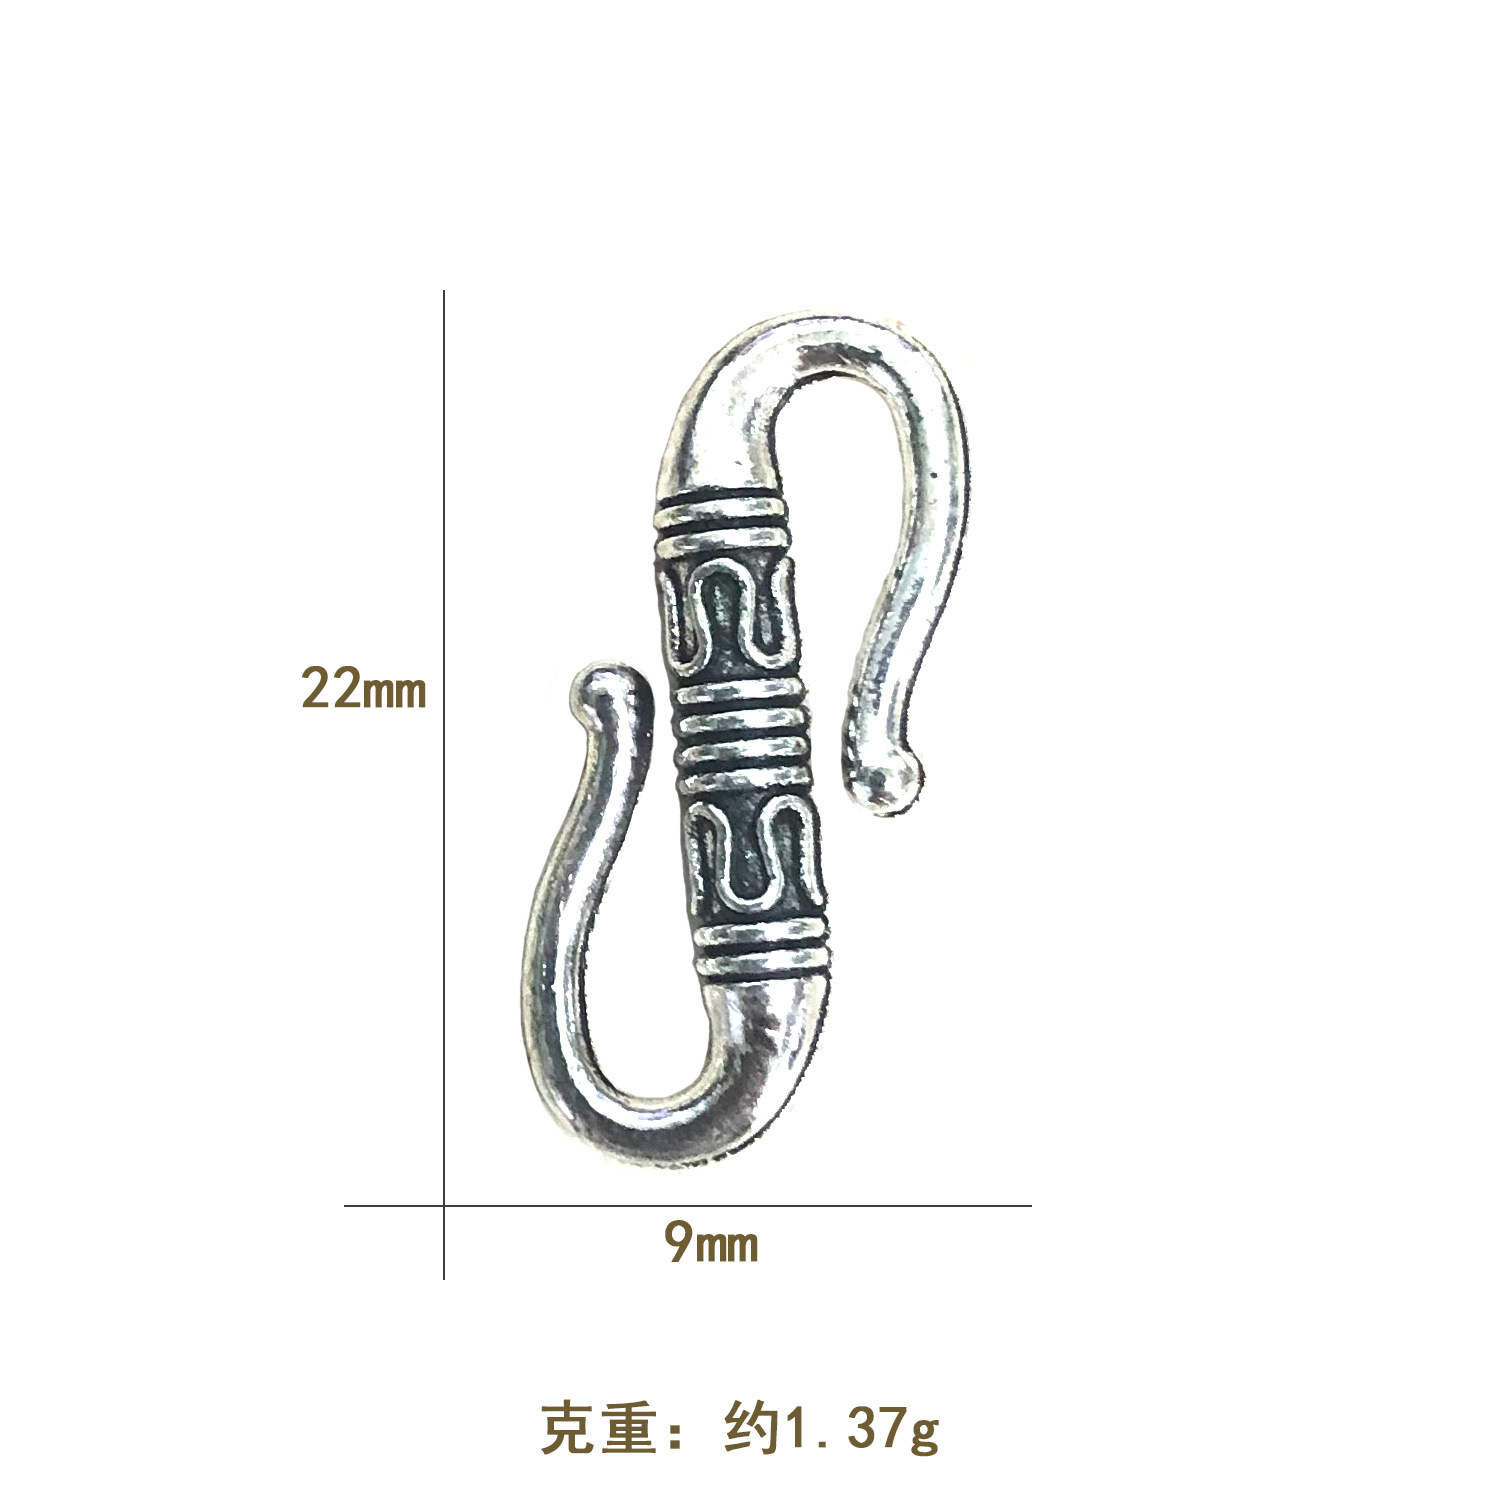 1:22 * 9 mm ancient silver